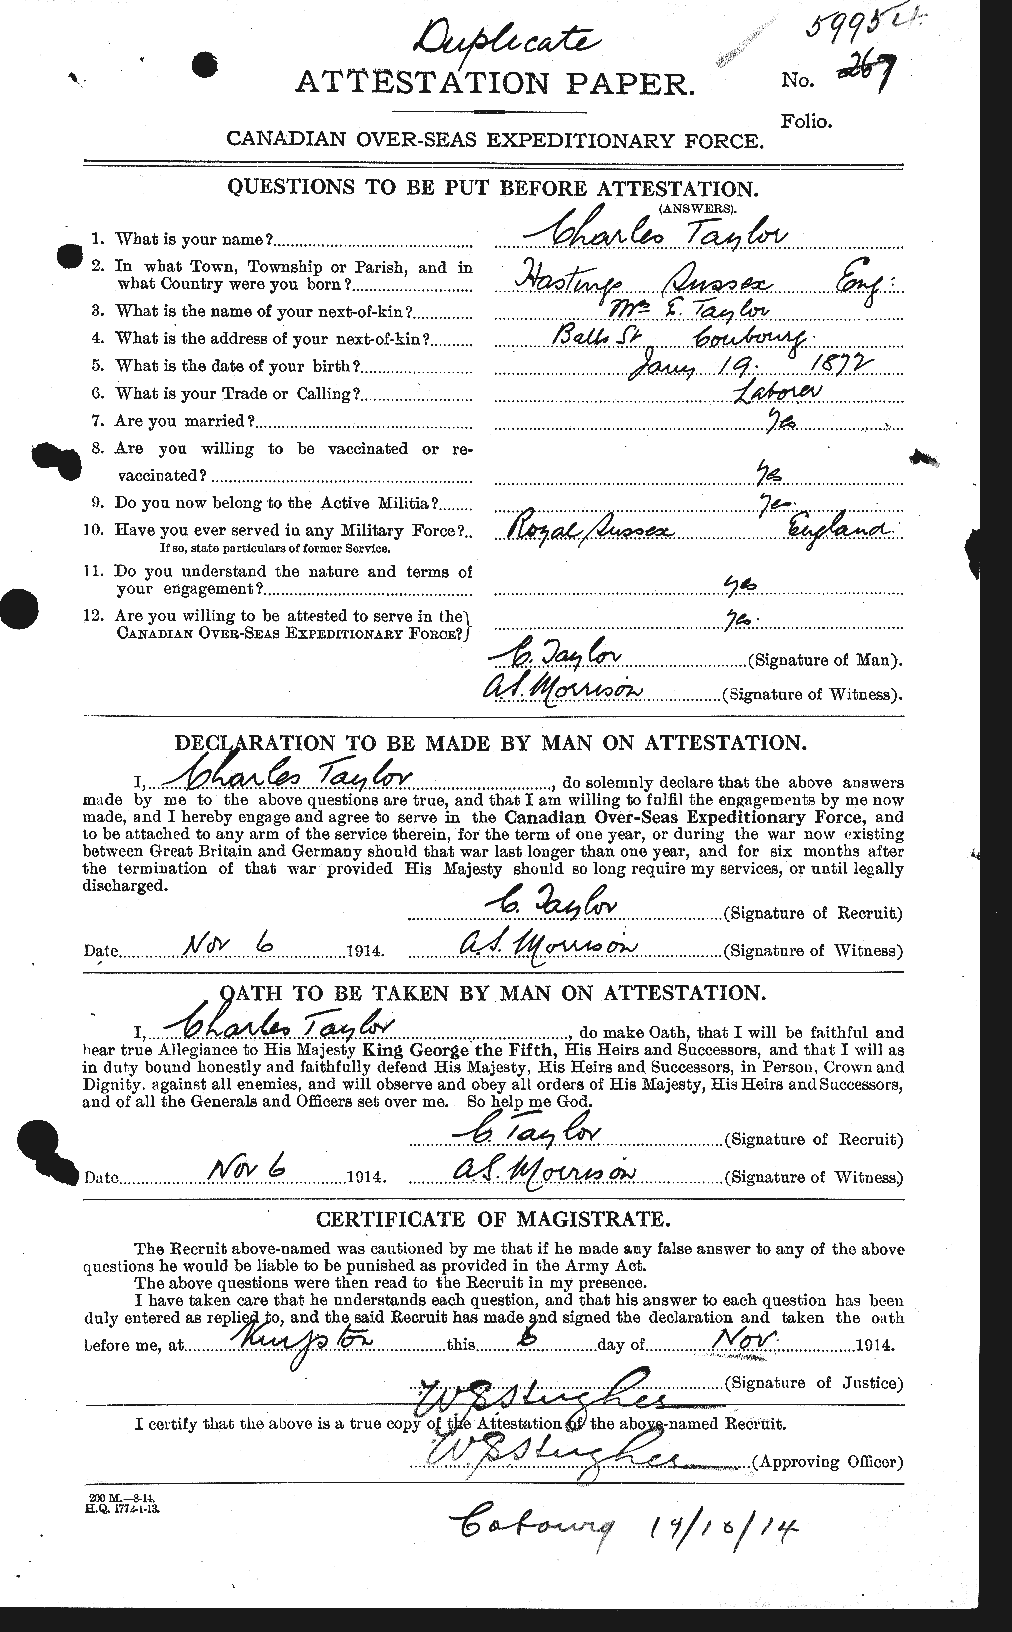 Personnel Records of the First World War - CEF 626824a